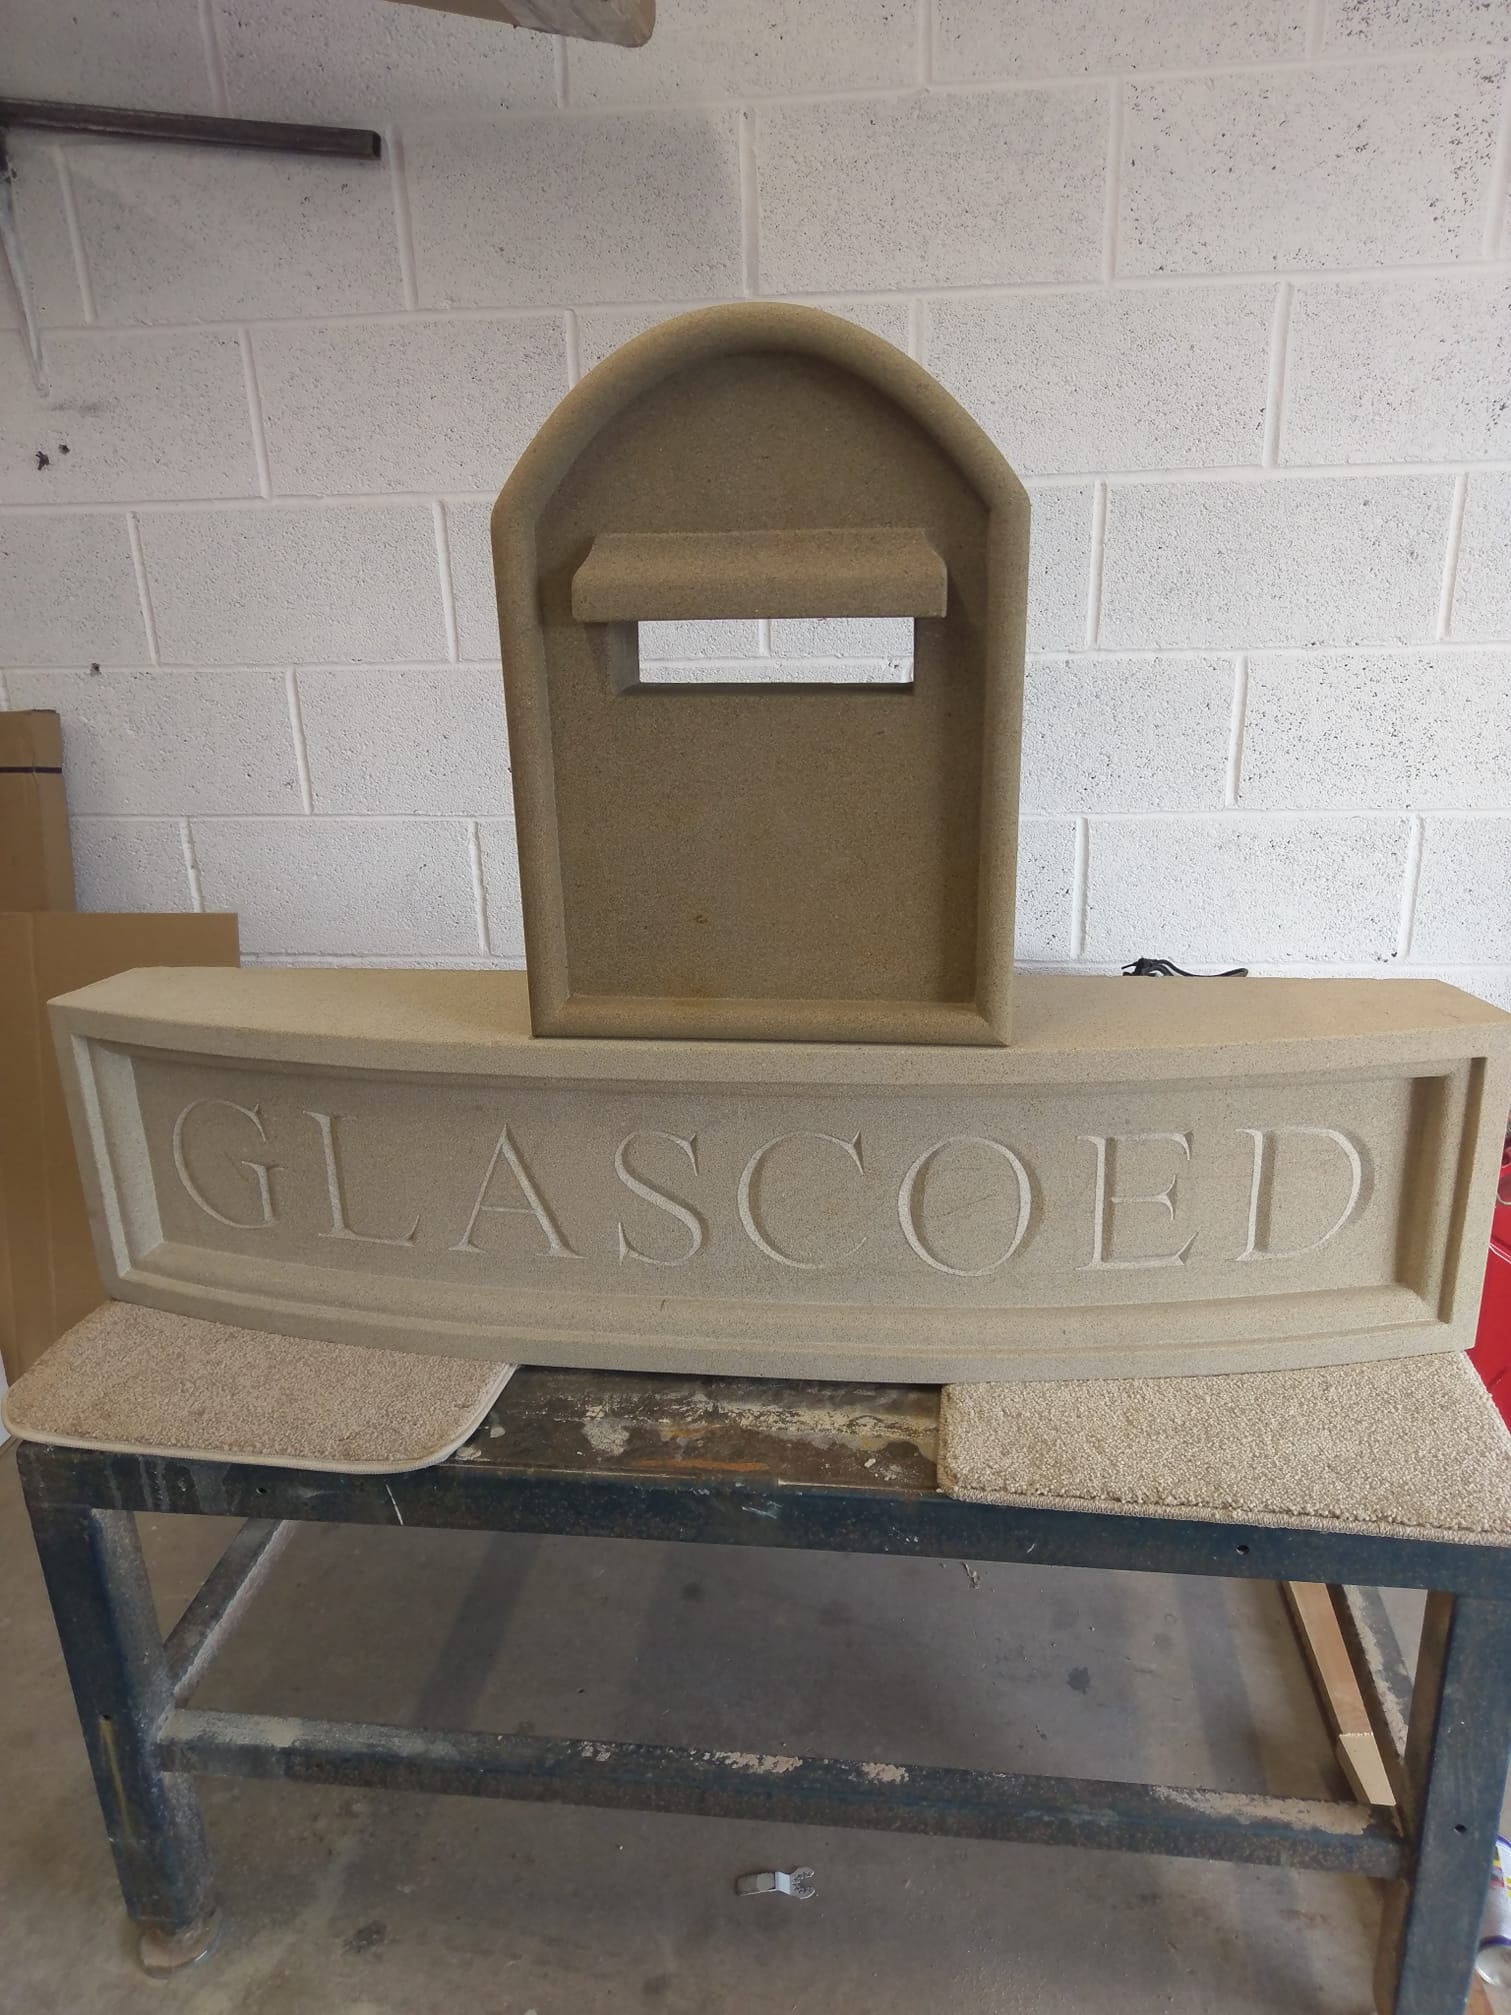 Our sandstone entrance project for a north wales manor house now has it's letter box to match. We are just waiting for some confirmation on some of the finer details. North Wales, North West, Wirral, Liverpool & Cheshire UK